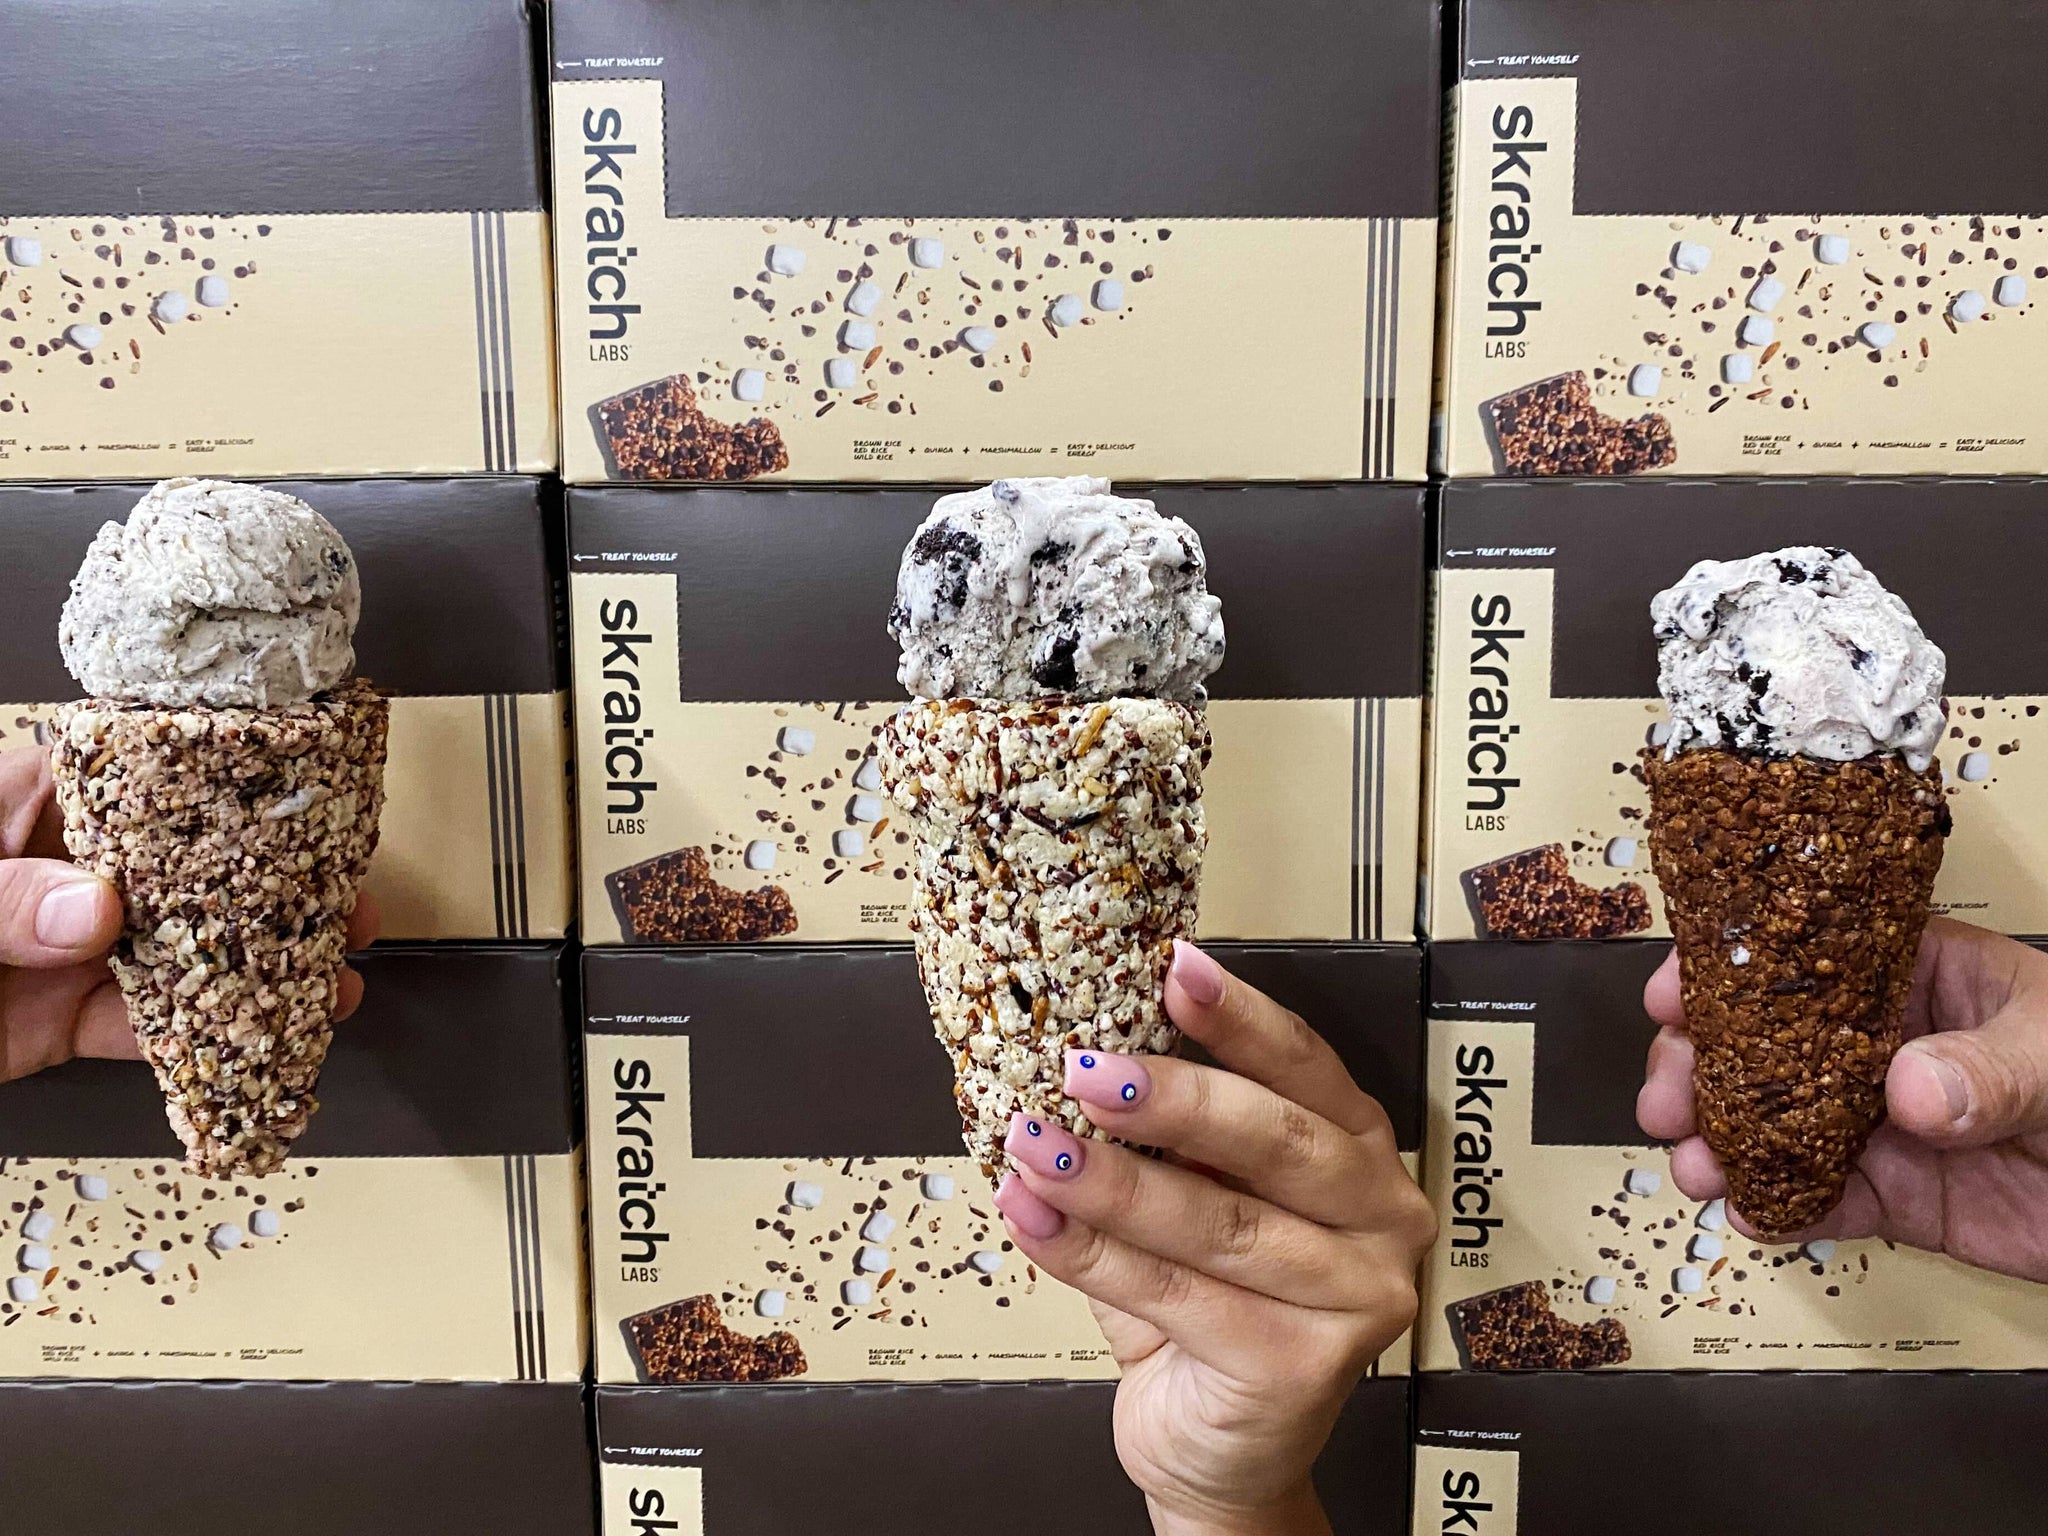 Hands holding ice cream cones in front of skratch crispy boxes